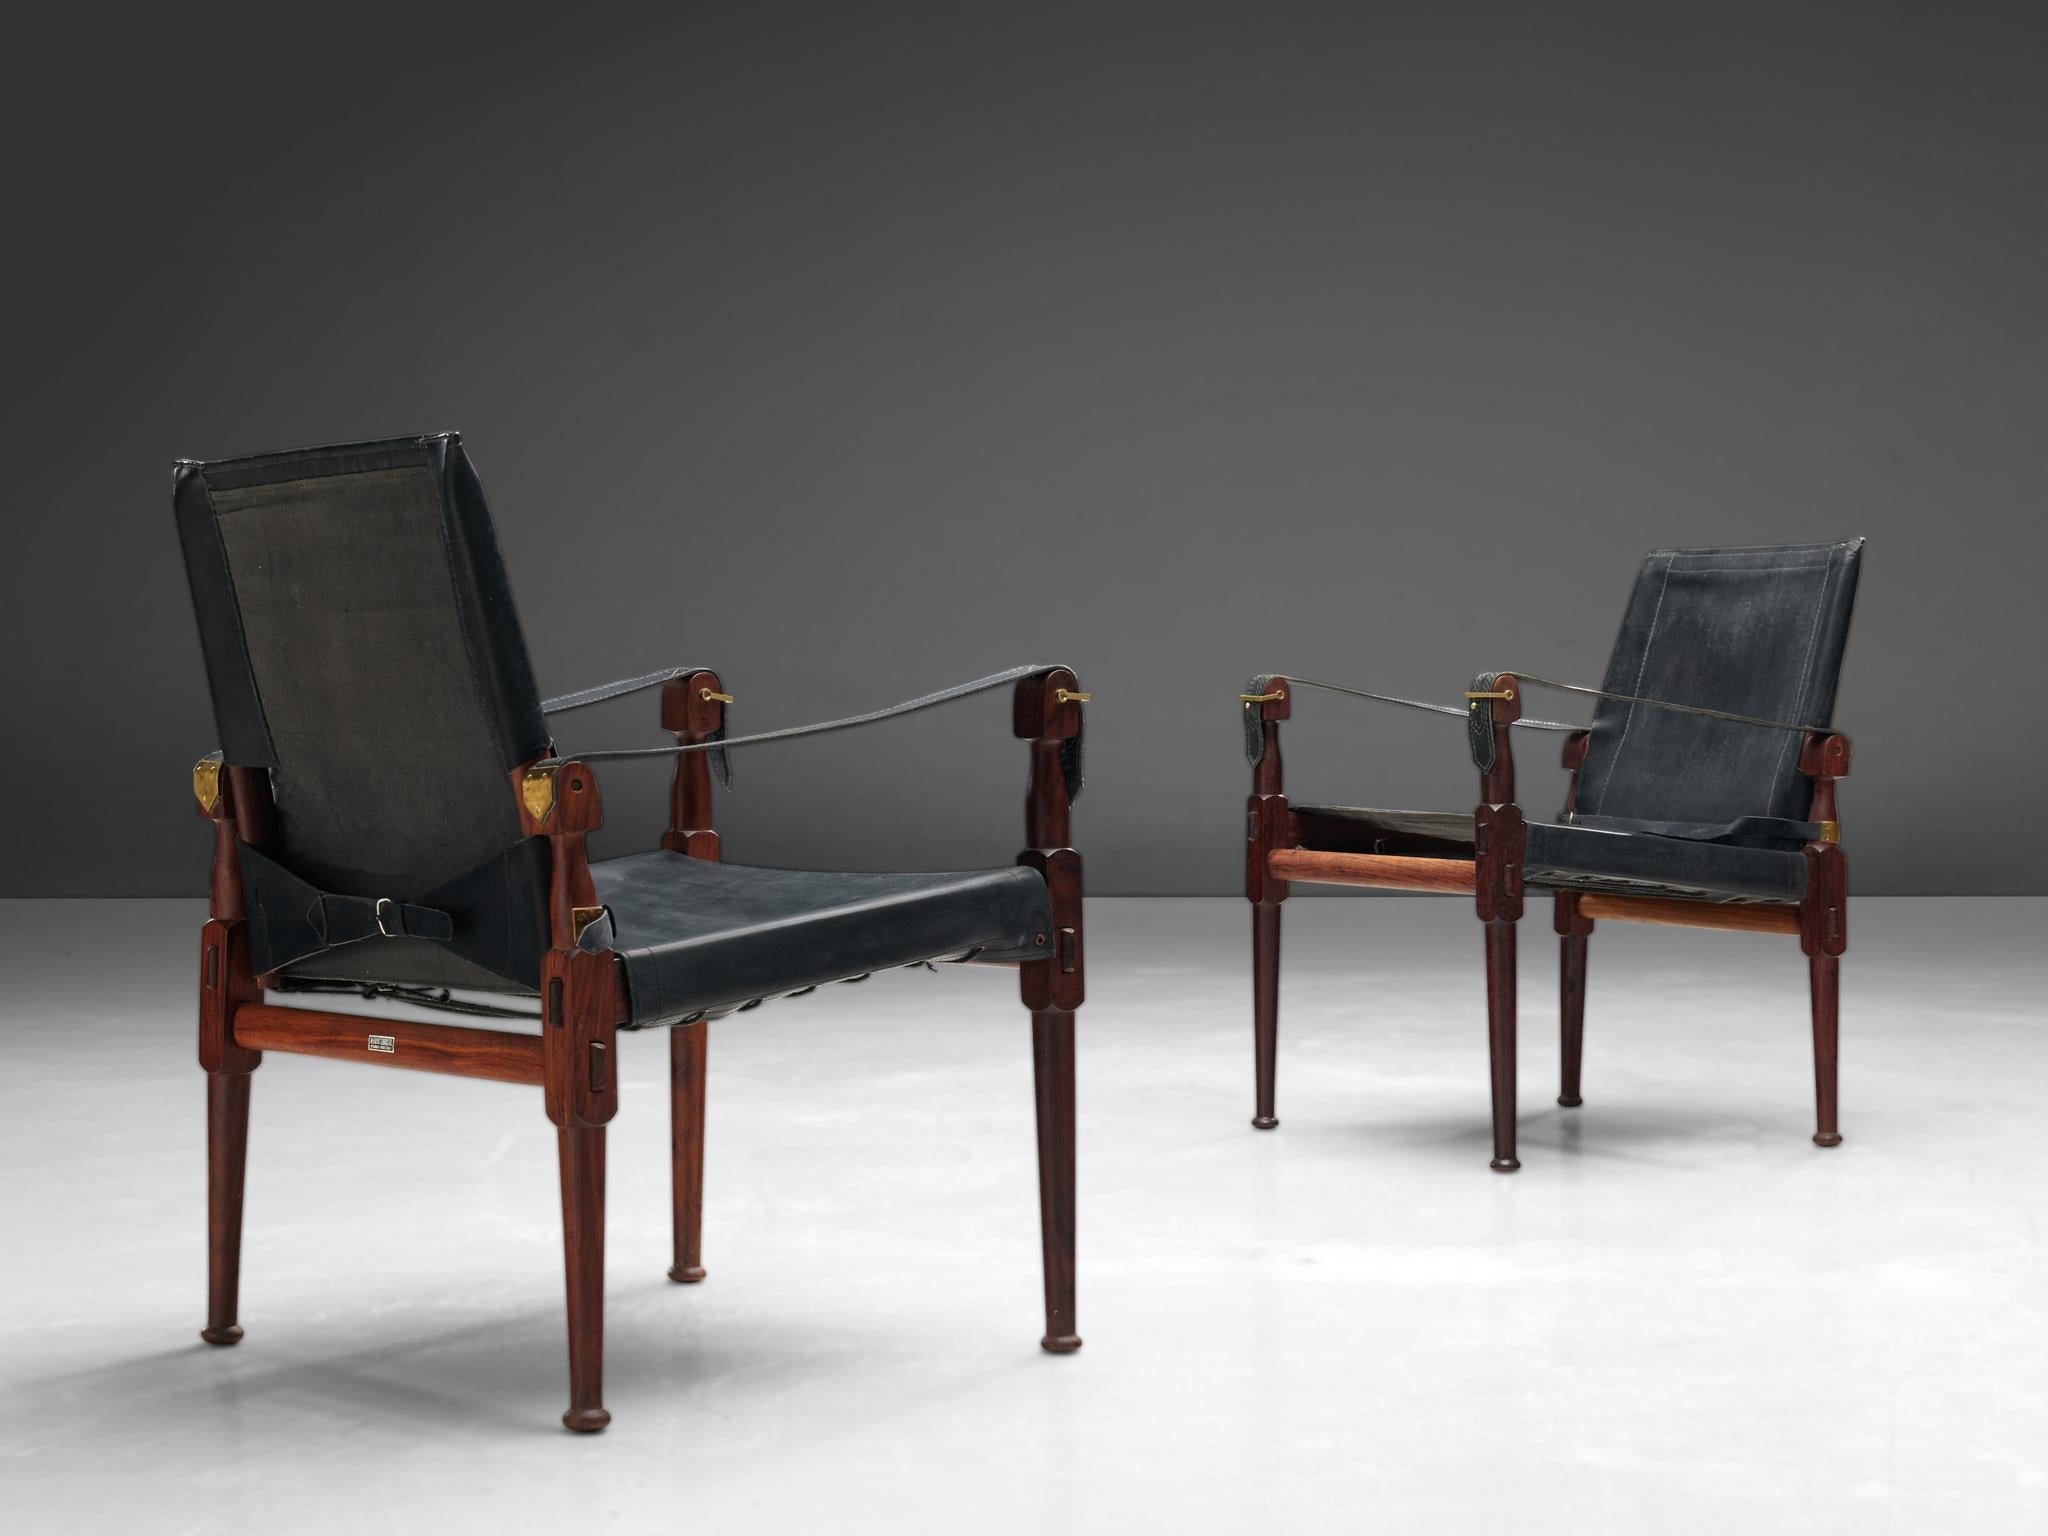 Wonderful 'Safari' lounge chairs, wood, black leather and brass, Pakistan, 1970s.

This 'Safari' armchair shows very elegant and well designed lines, in combination with carefully crafted wood joints. The black leather with multiple straps completes